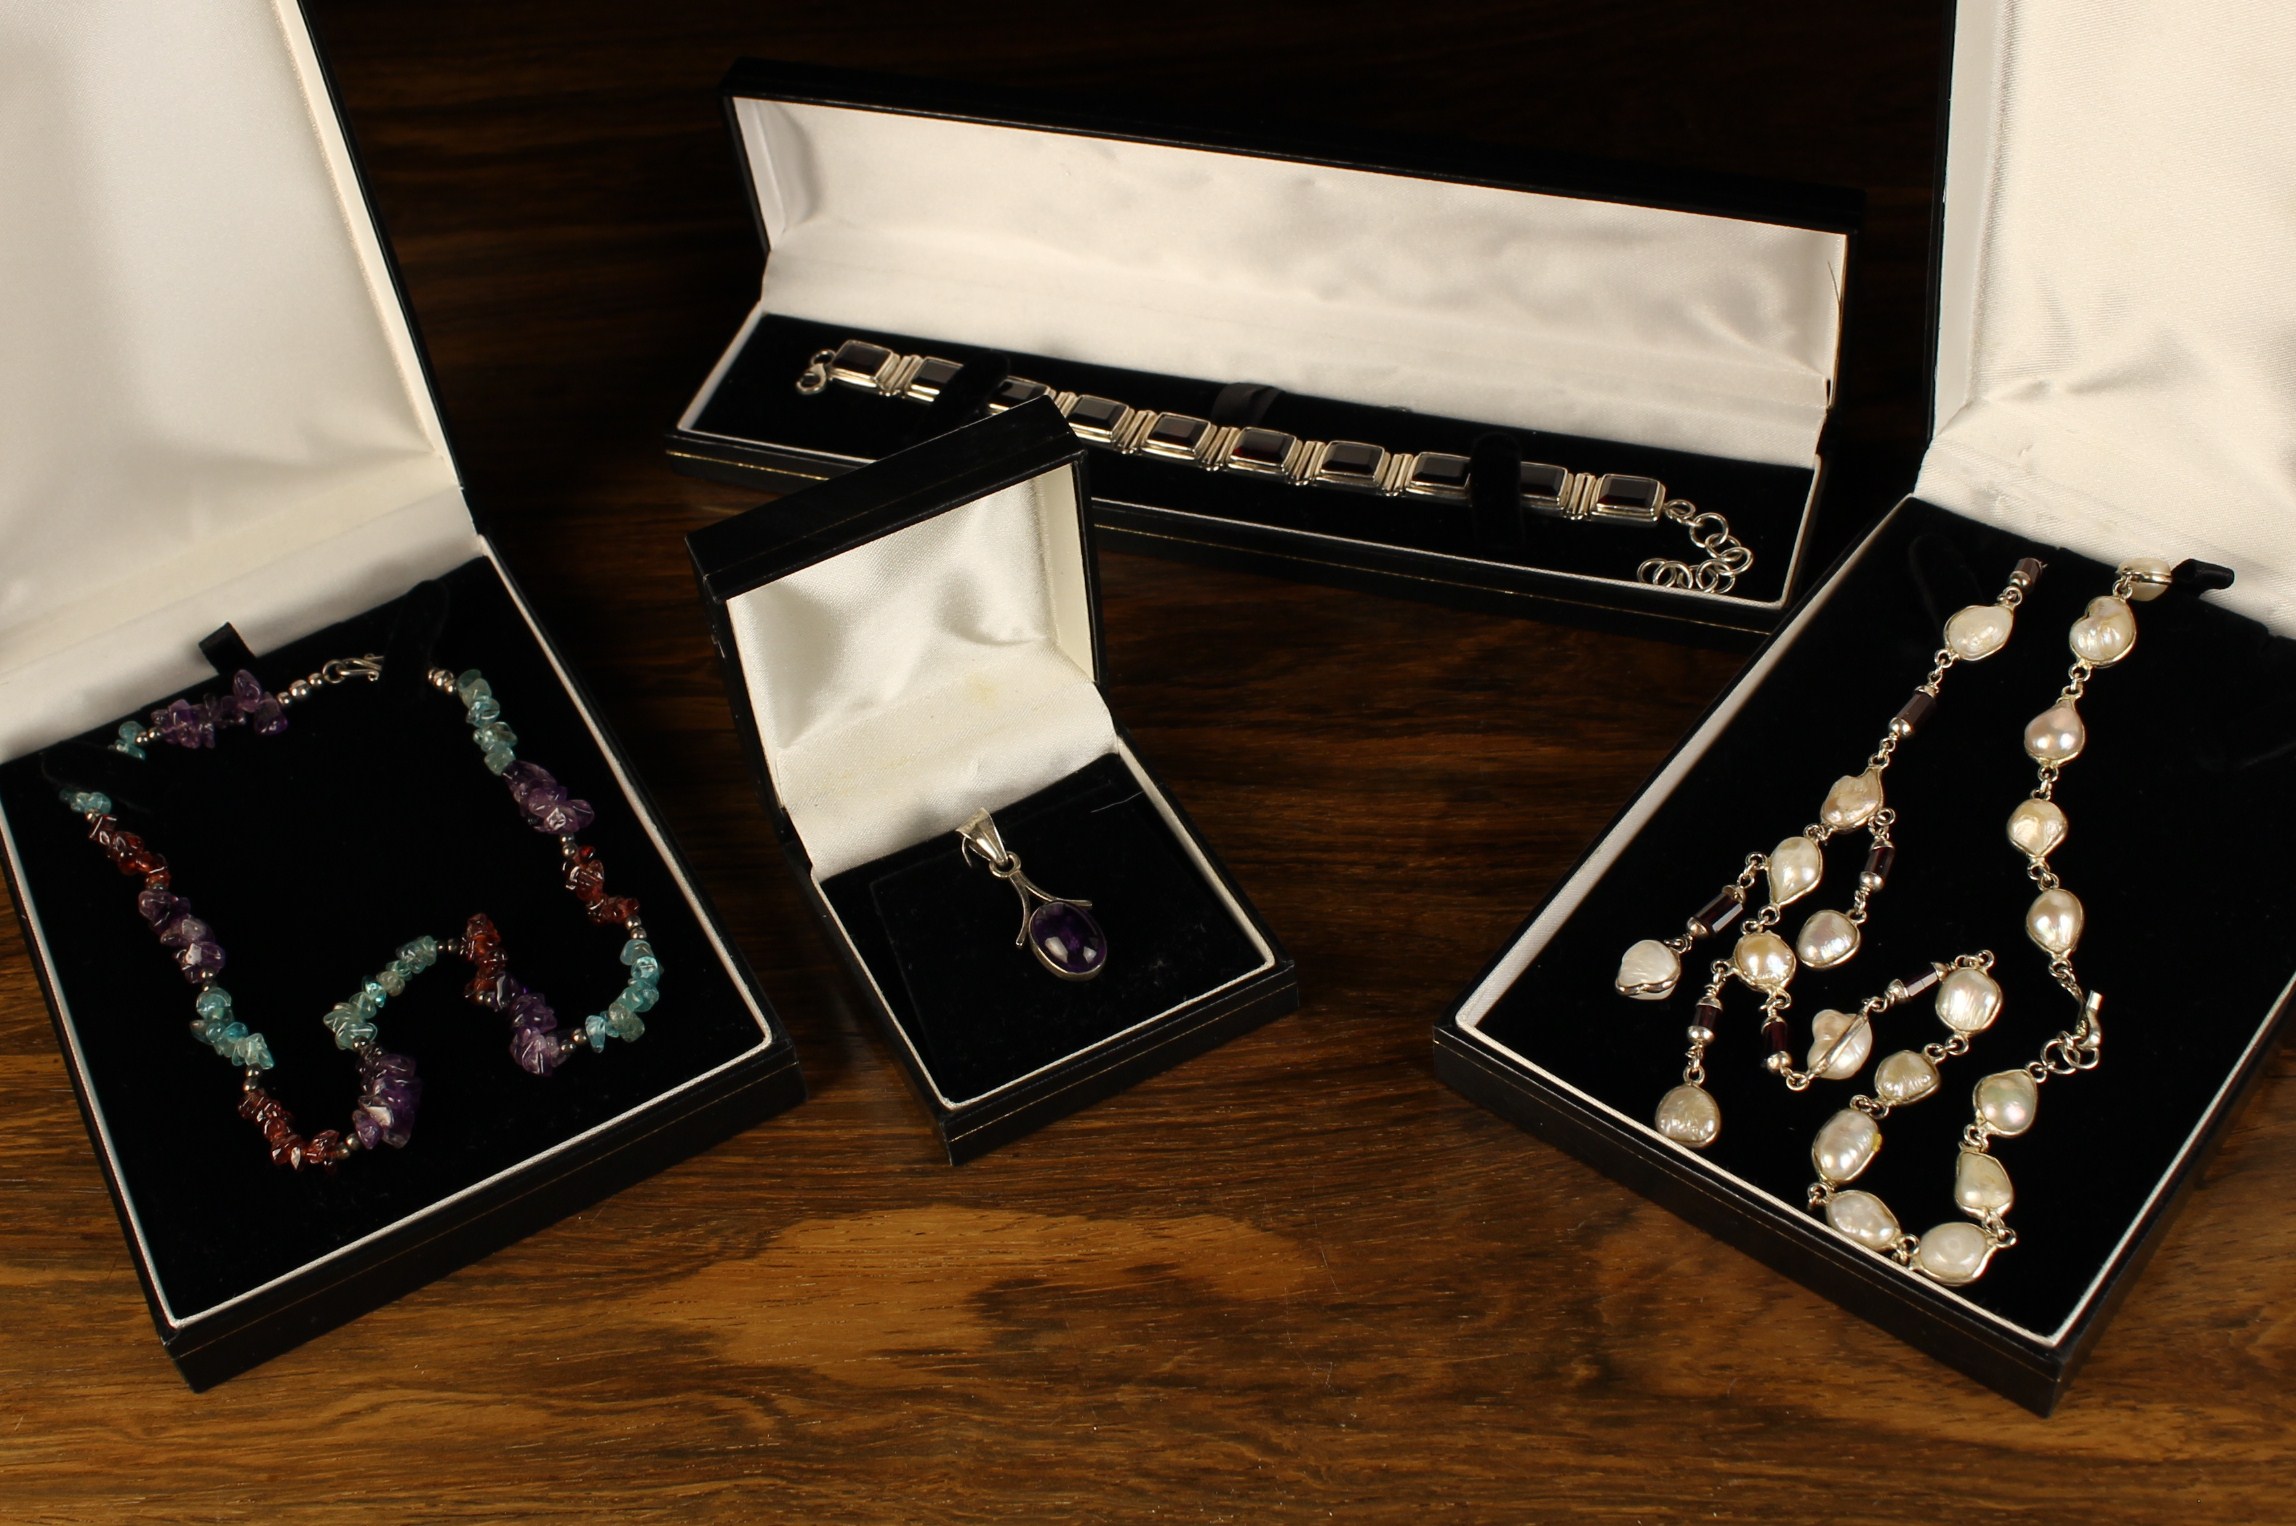 Two Necklaces, a Bracelet and a Pendant housed in 'Expressions' presentation cases.